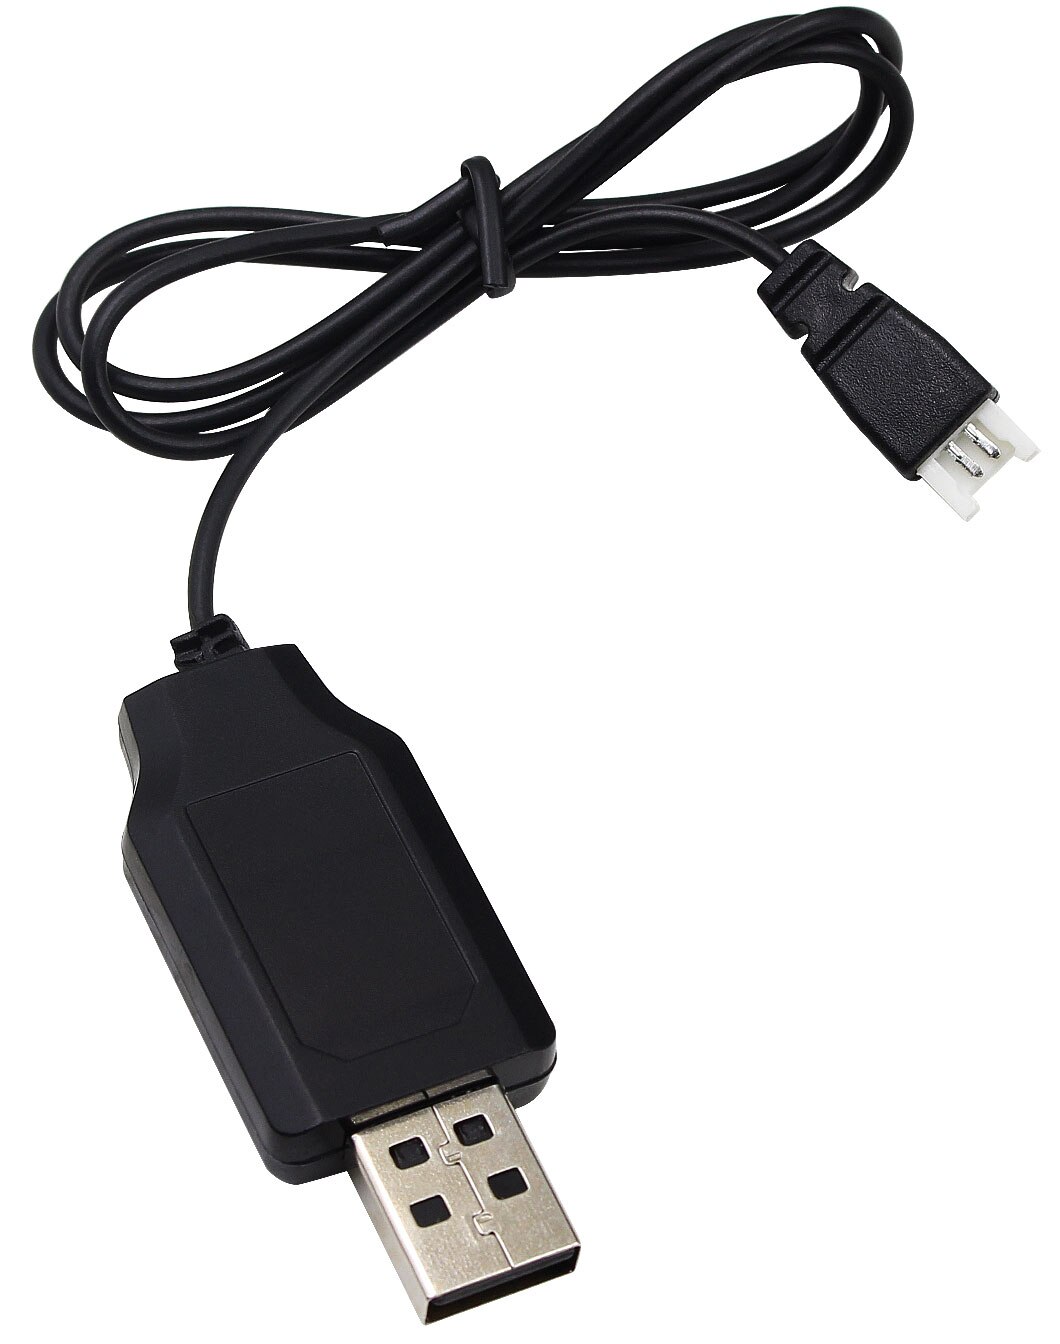 Usb Battery Charger Charging Cable Cord Lead Voor Heilige Steen M62